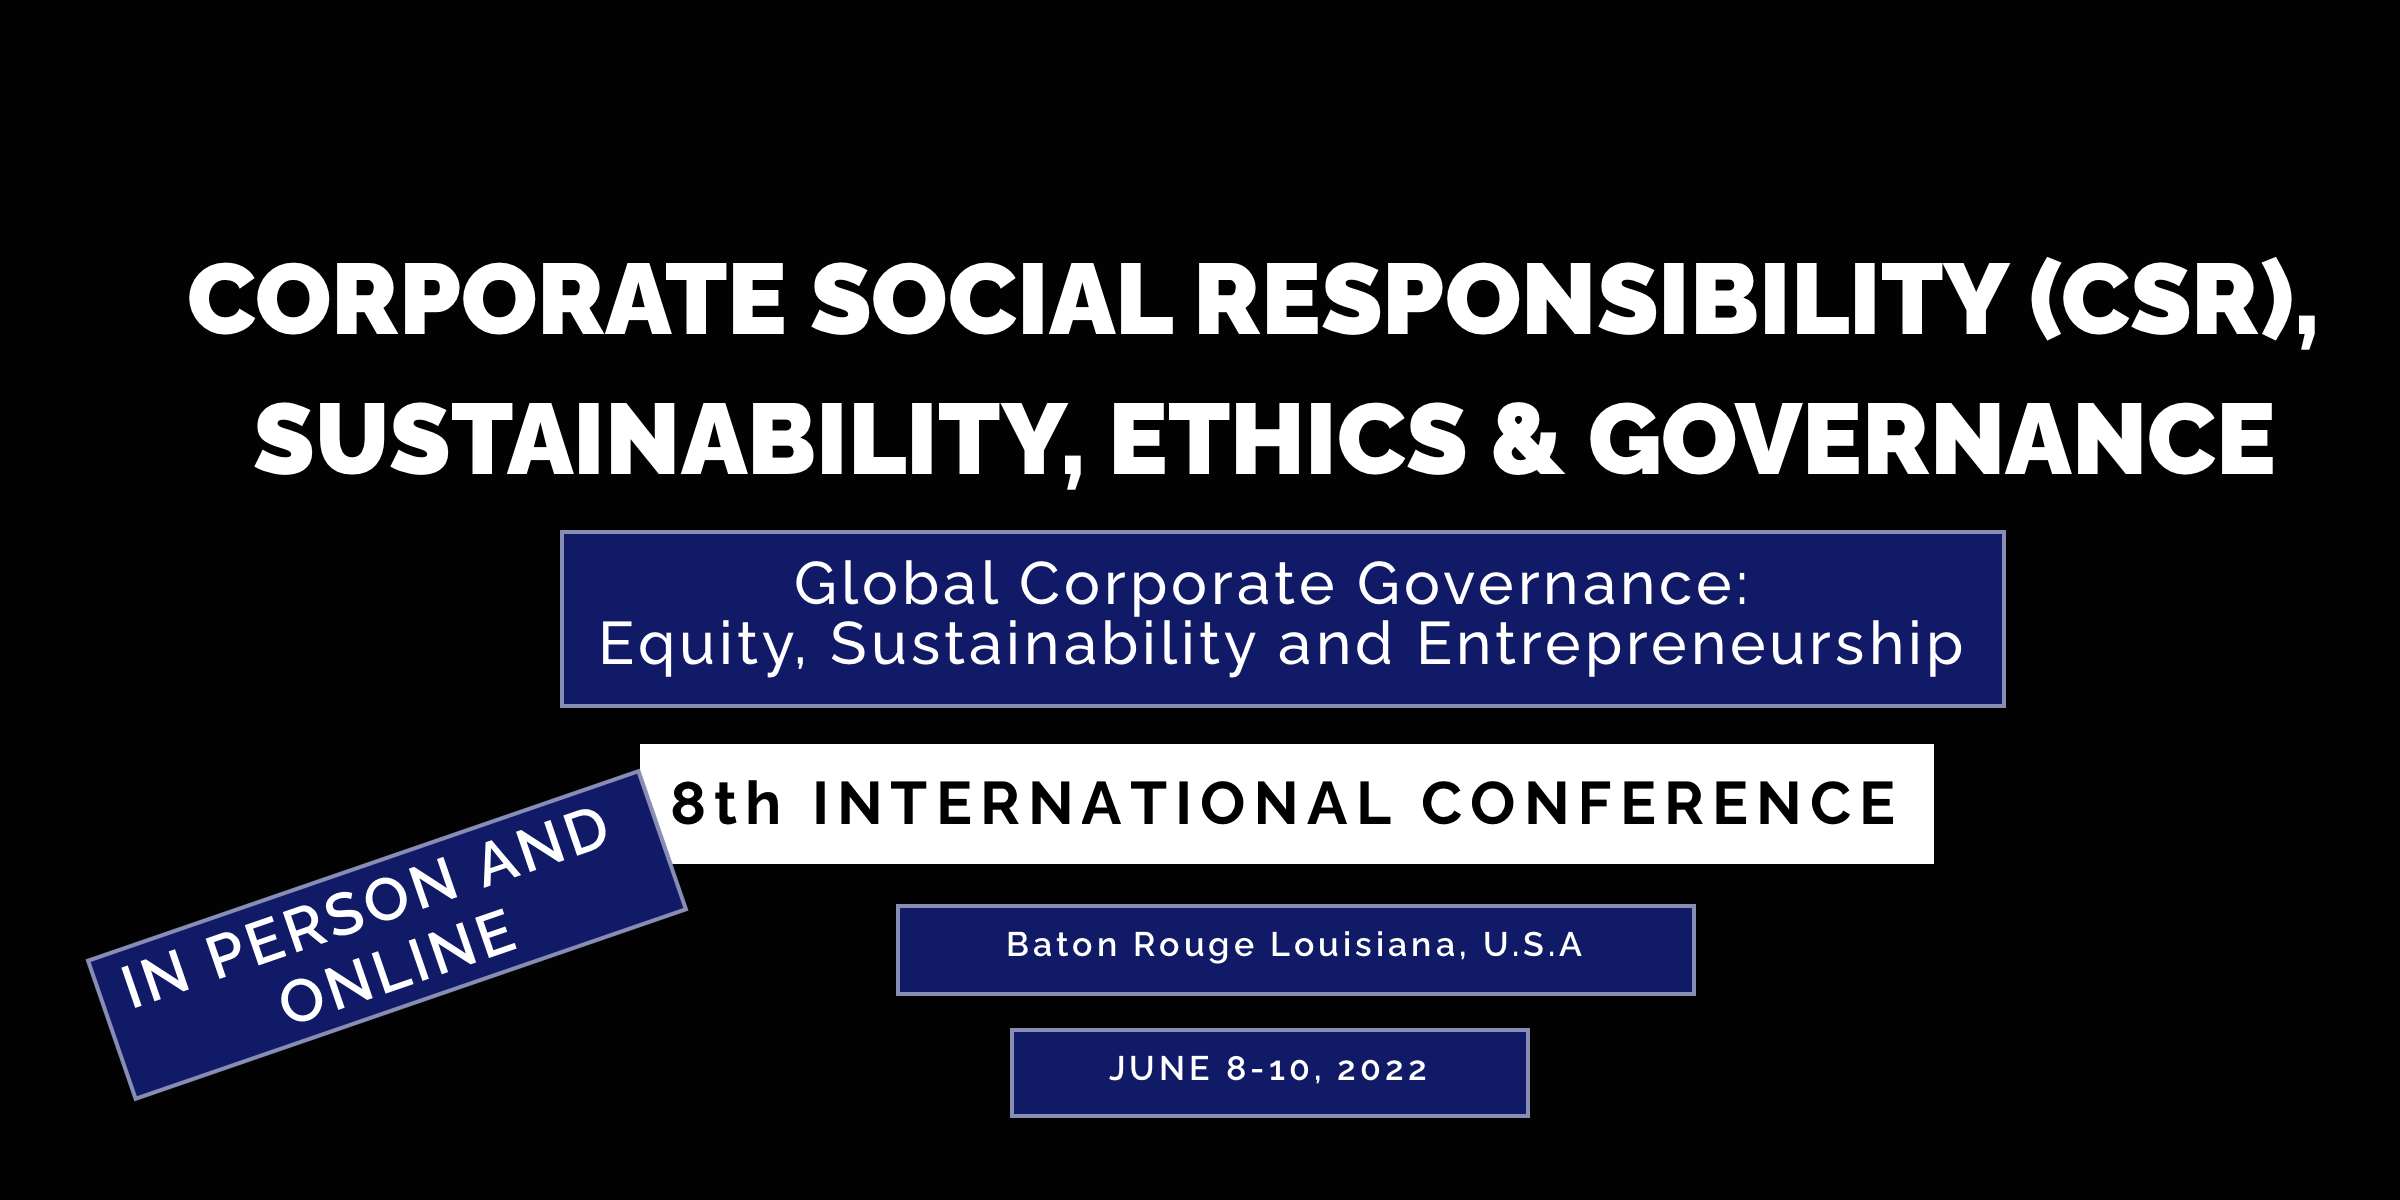 image for OWL ESG's 8th International Conference, featuring the company logo and event details.